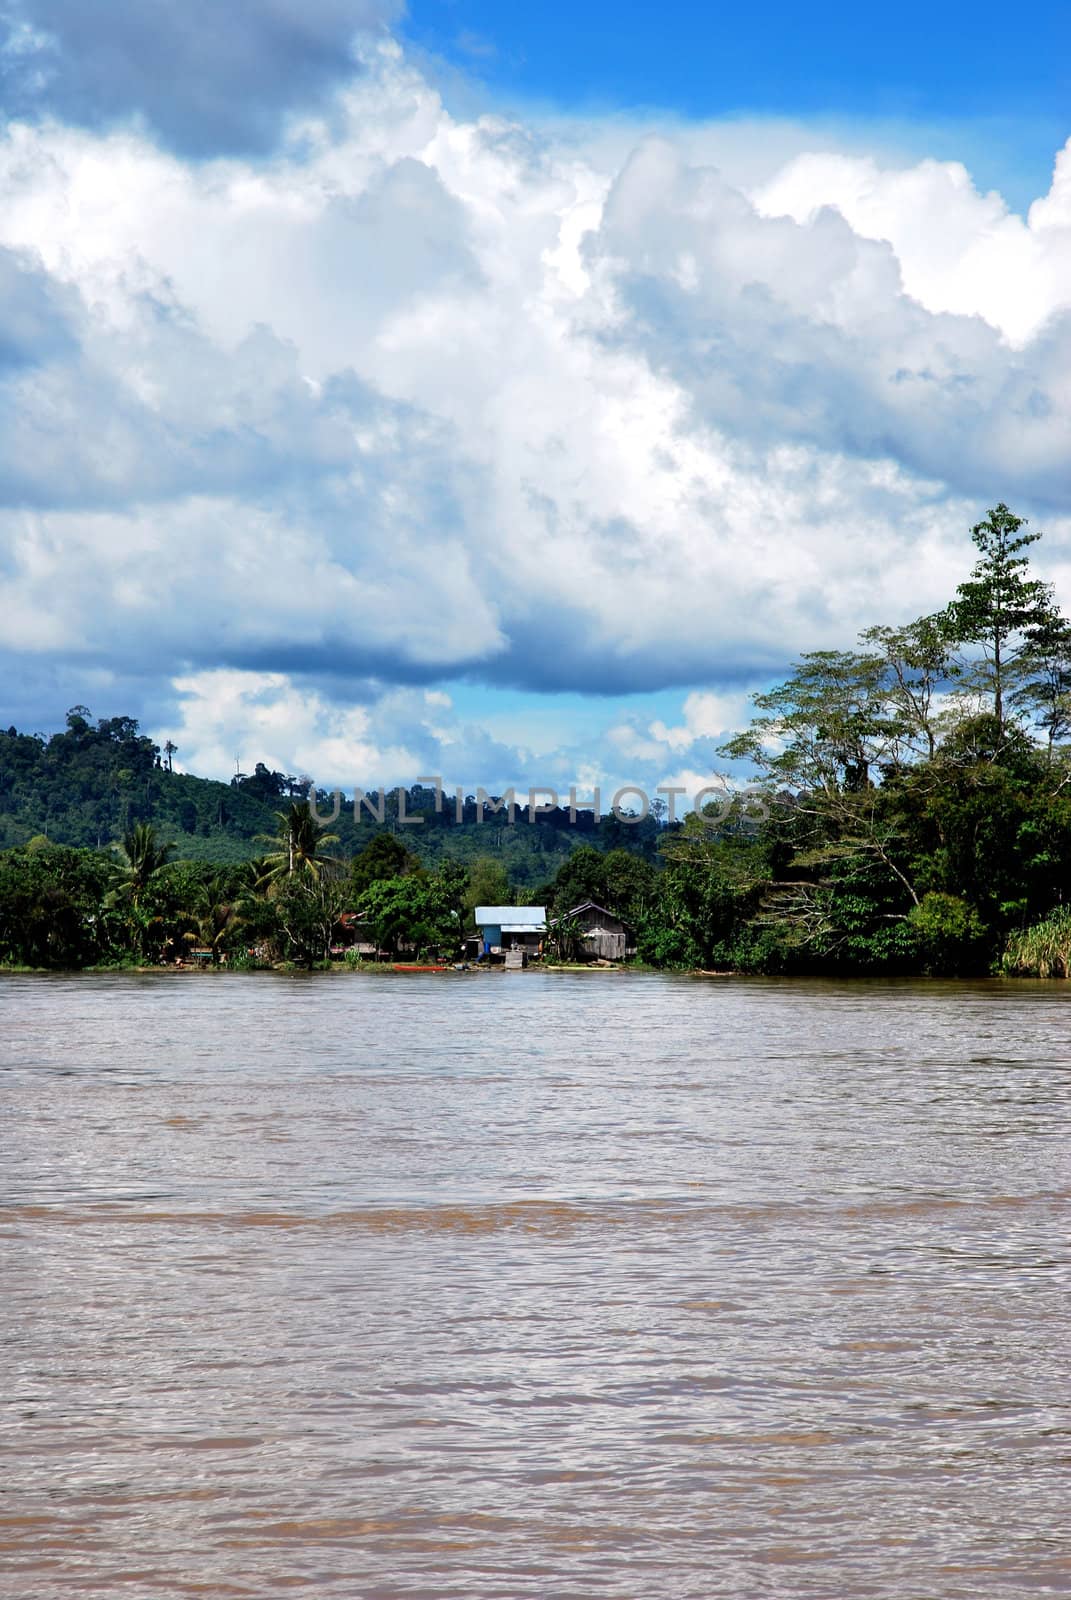 view of a village on the banks of the river Malinau, Indonesia